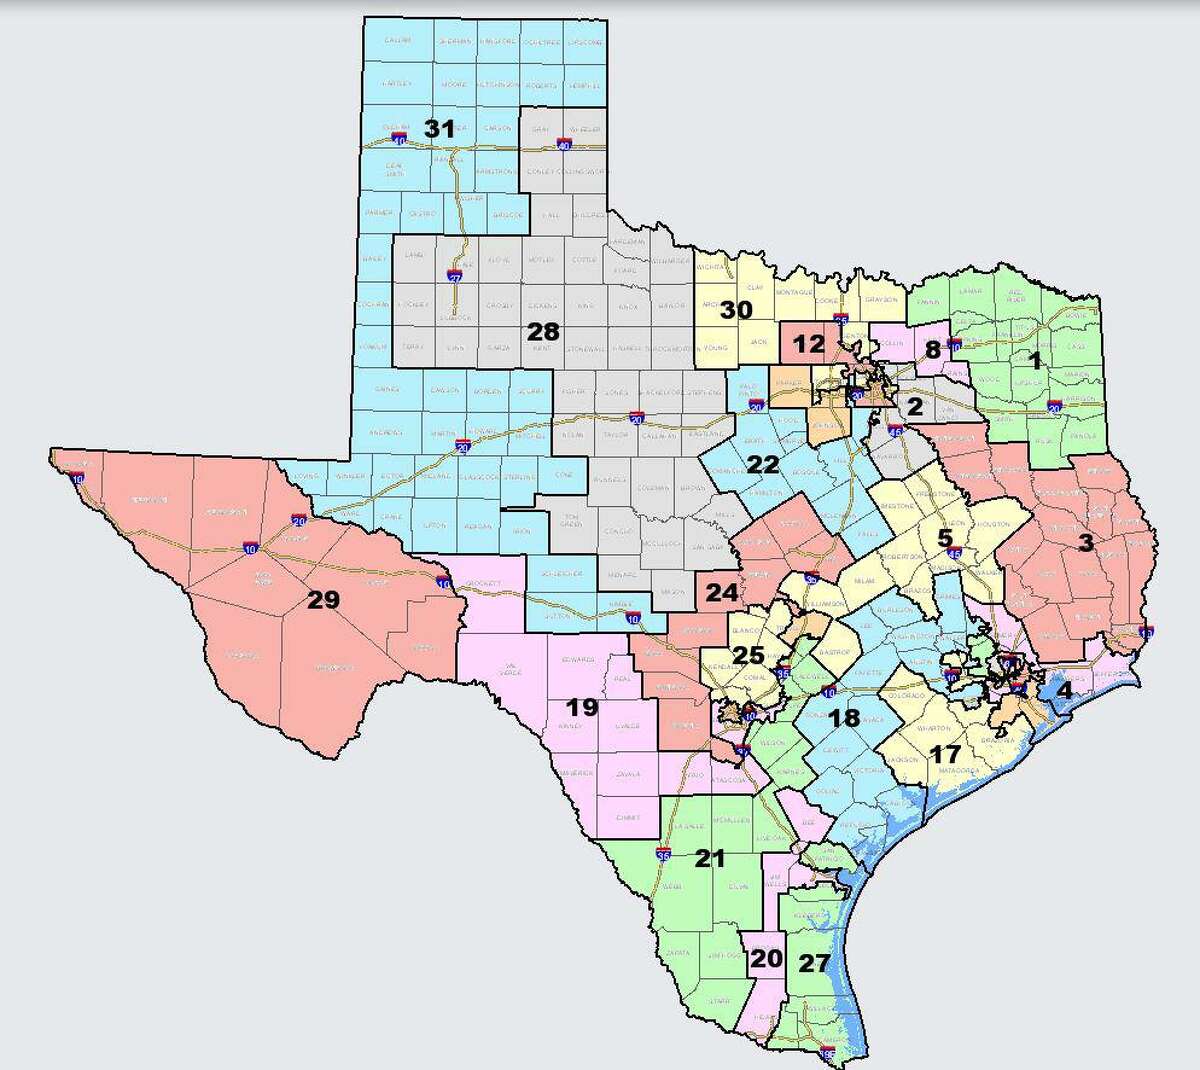 Take a map of the population and overlay a grid of squares for more fair redistricting, a reader suggests.